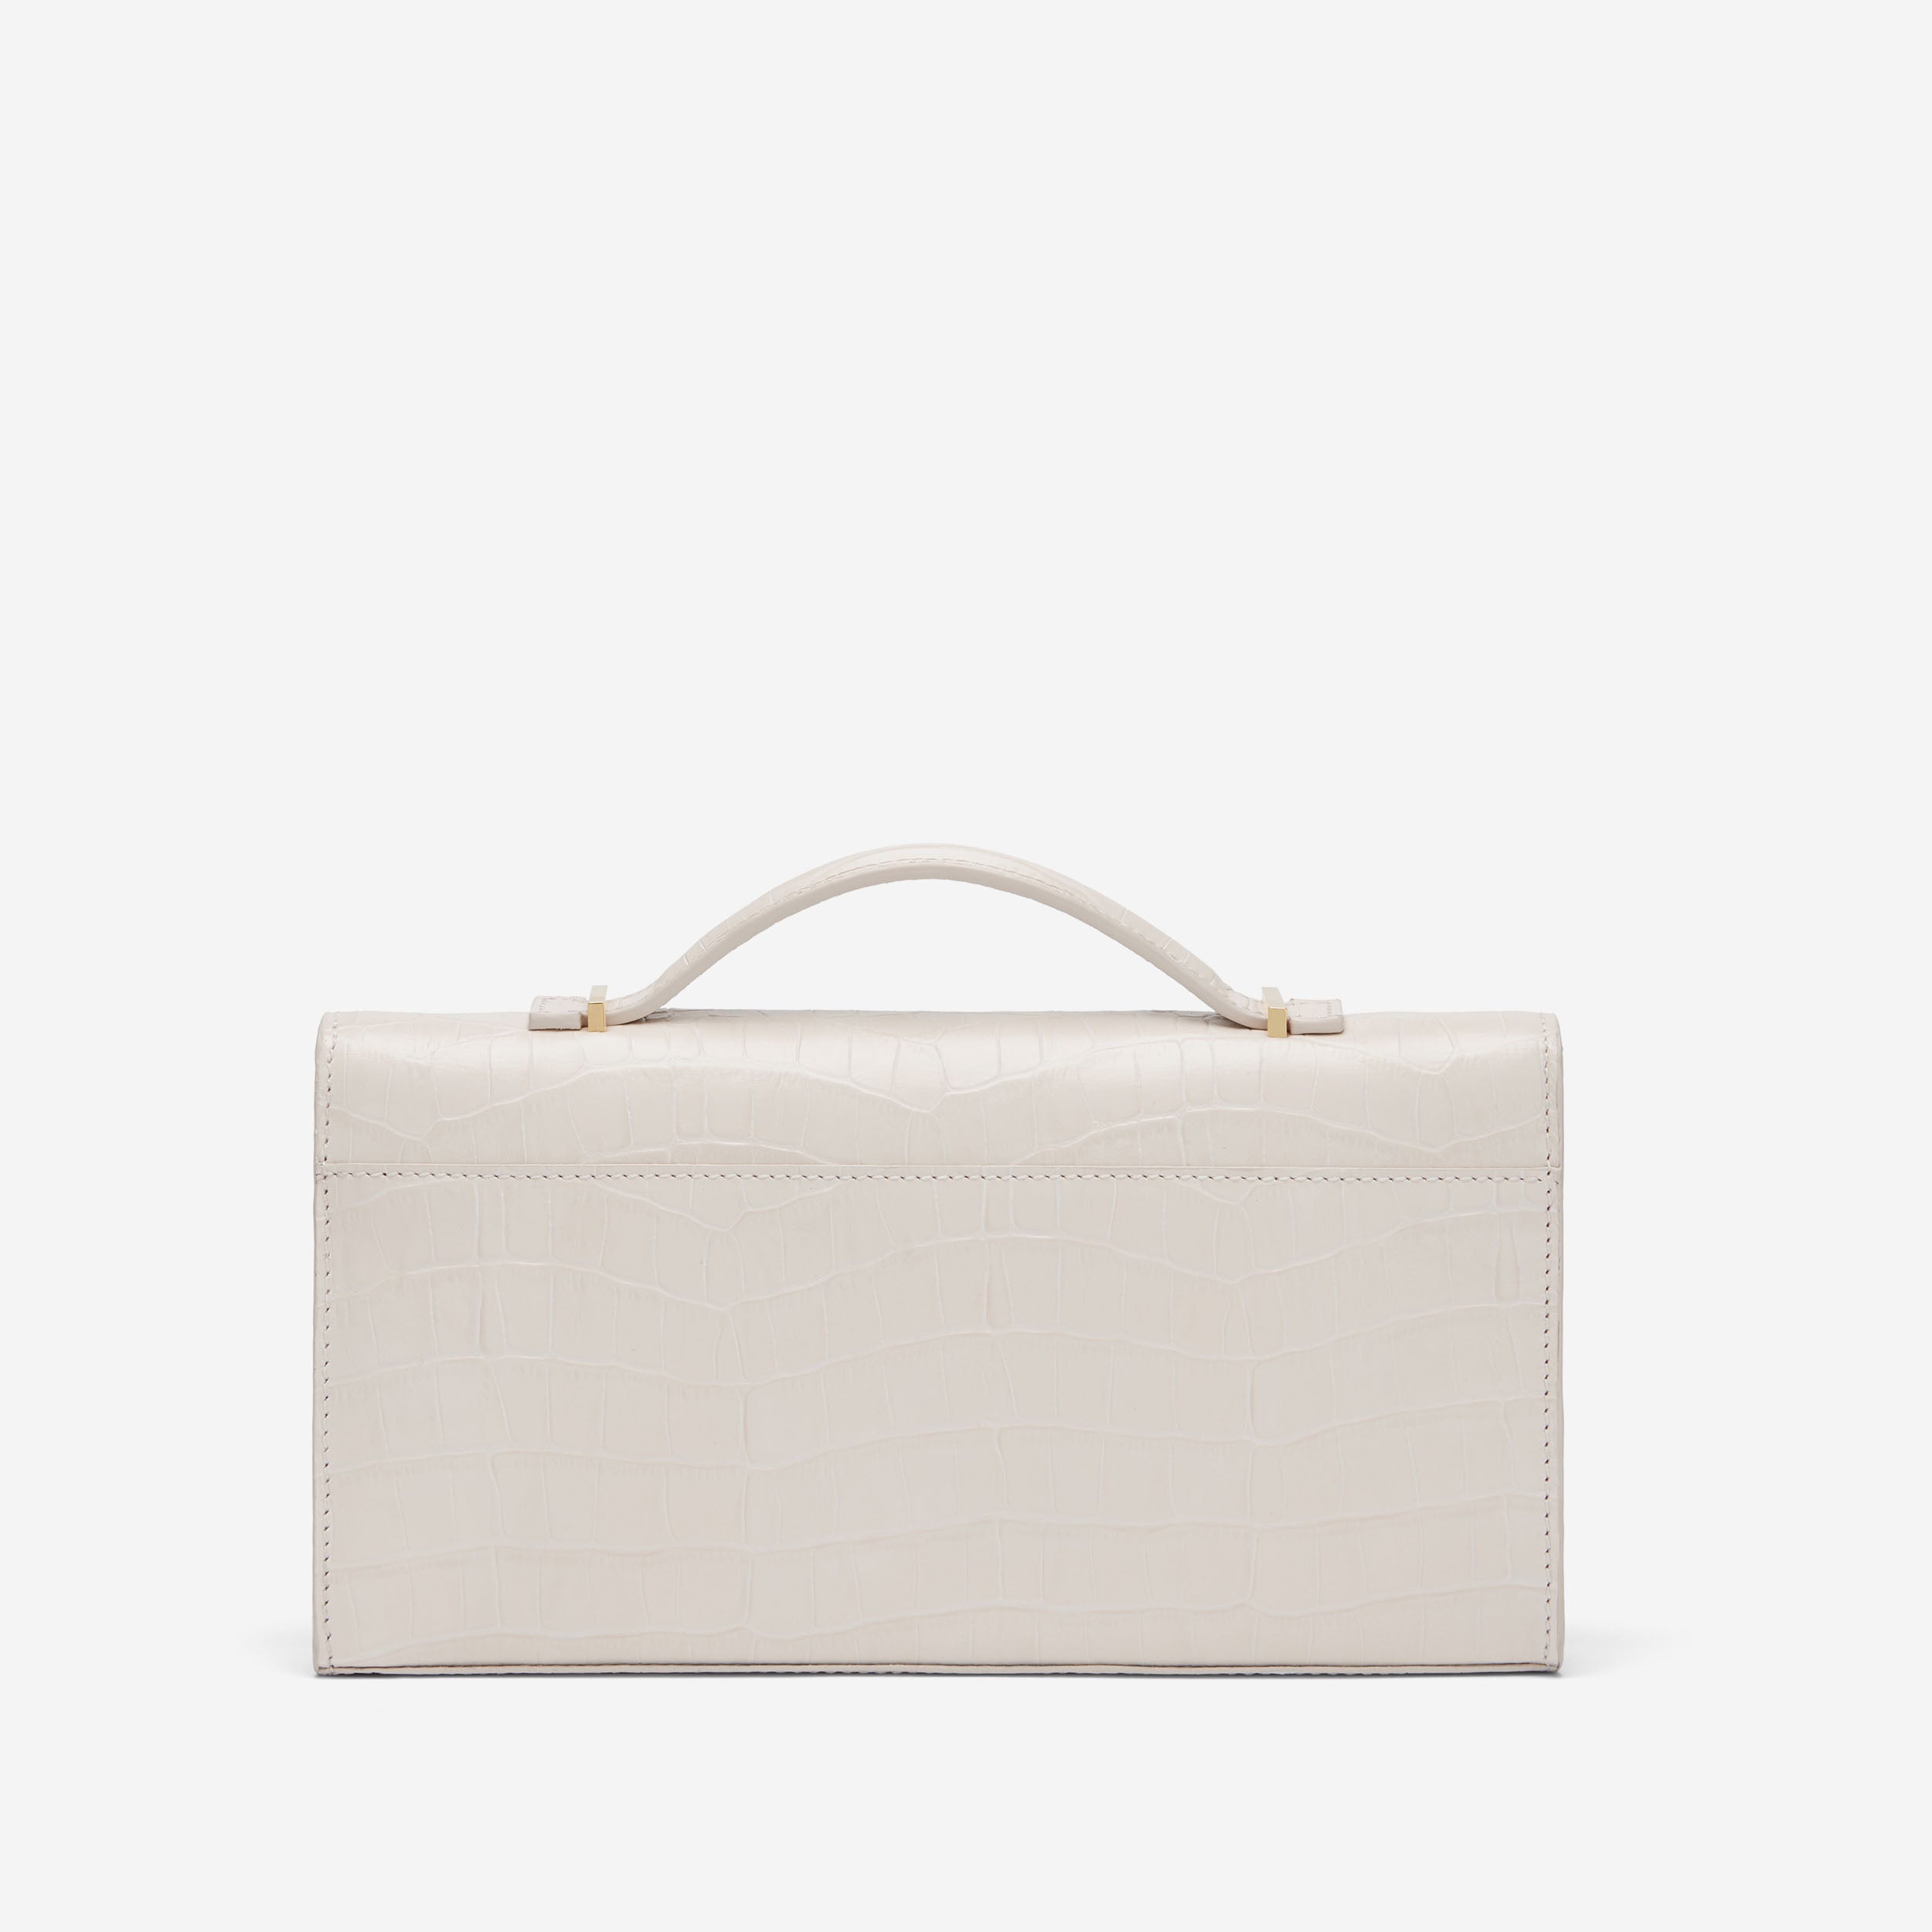 The Vancouver Clutch | Off-White Croc-Effect | DeMellier